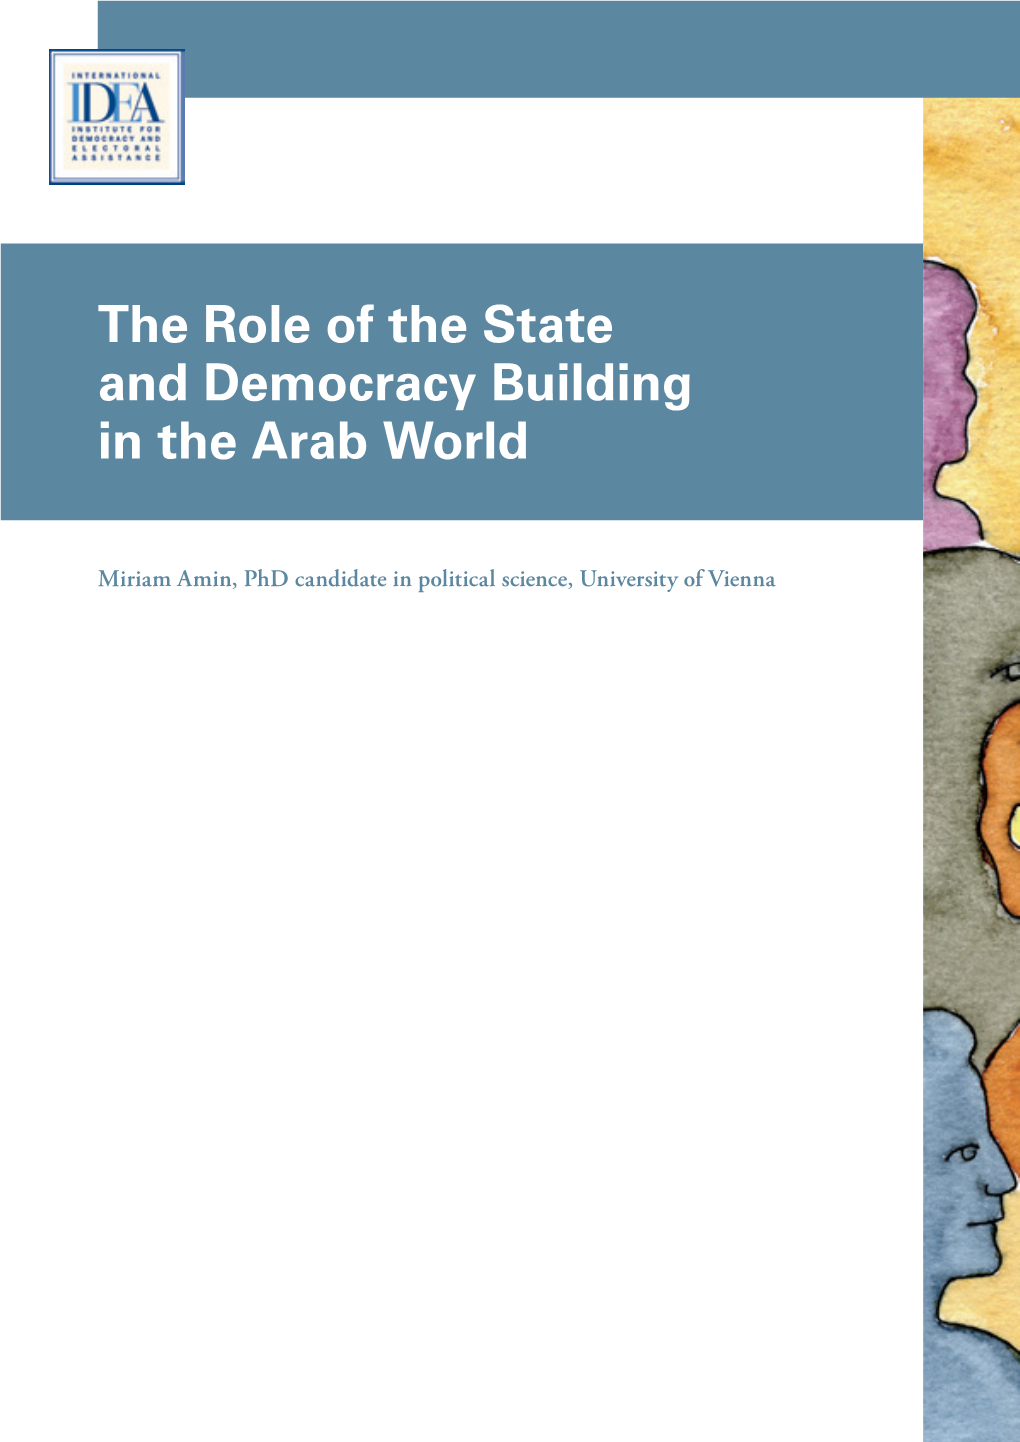 The Role of the State and Democracy Building in the Arab World